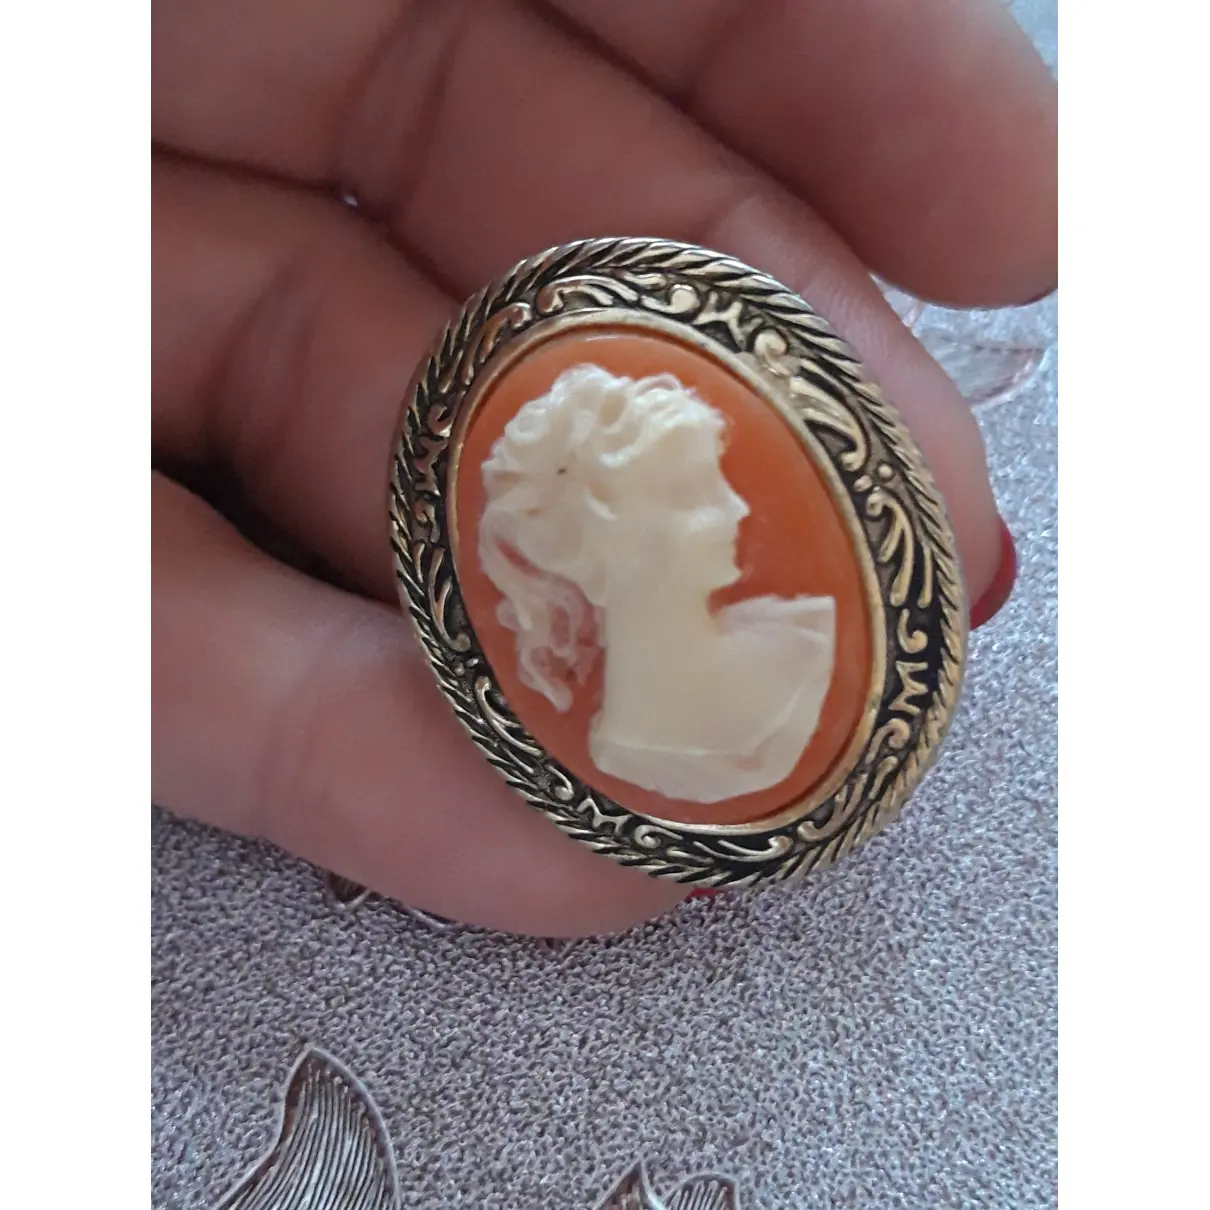 Buy Cameo Pin & brooche online